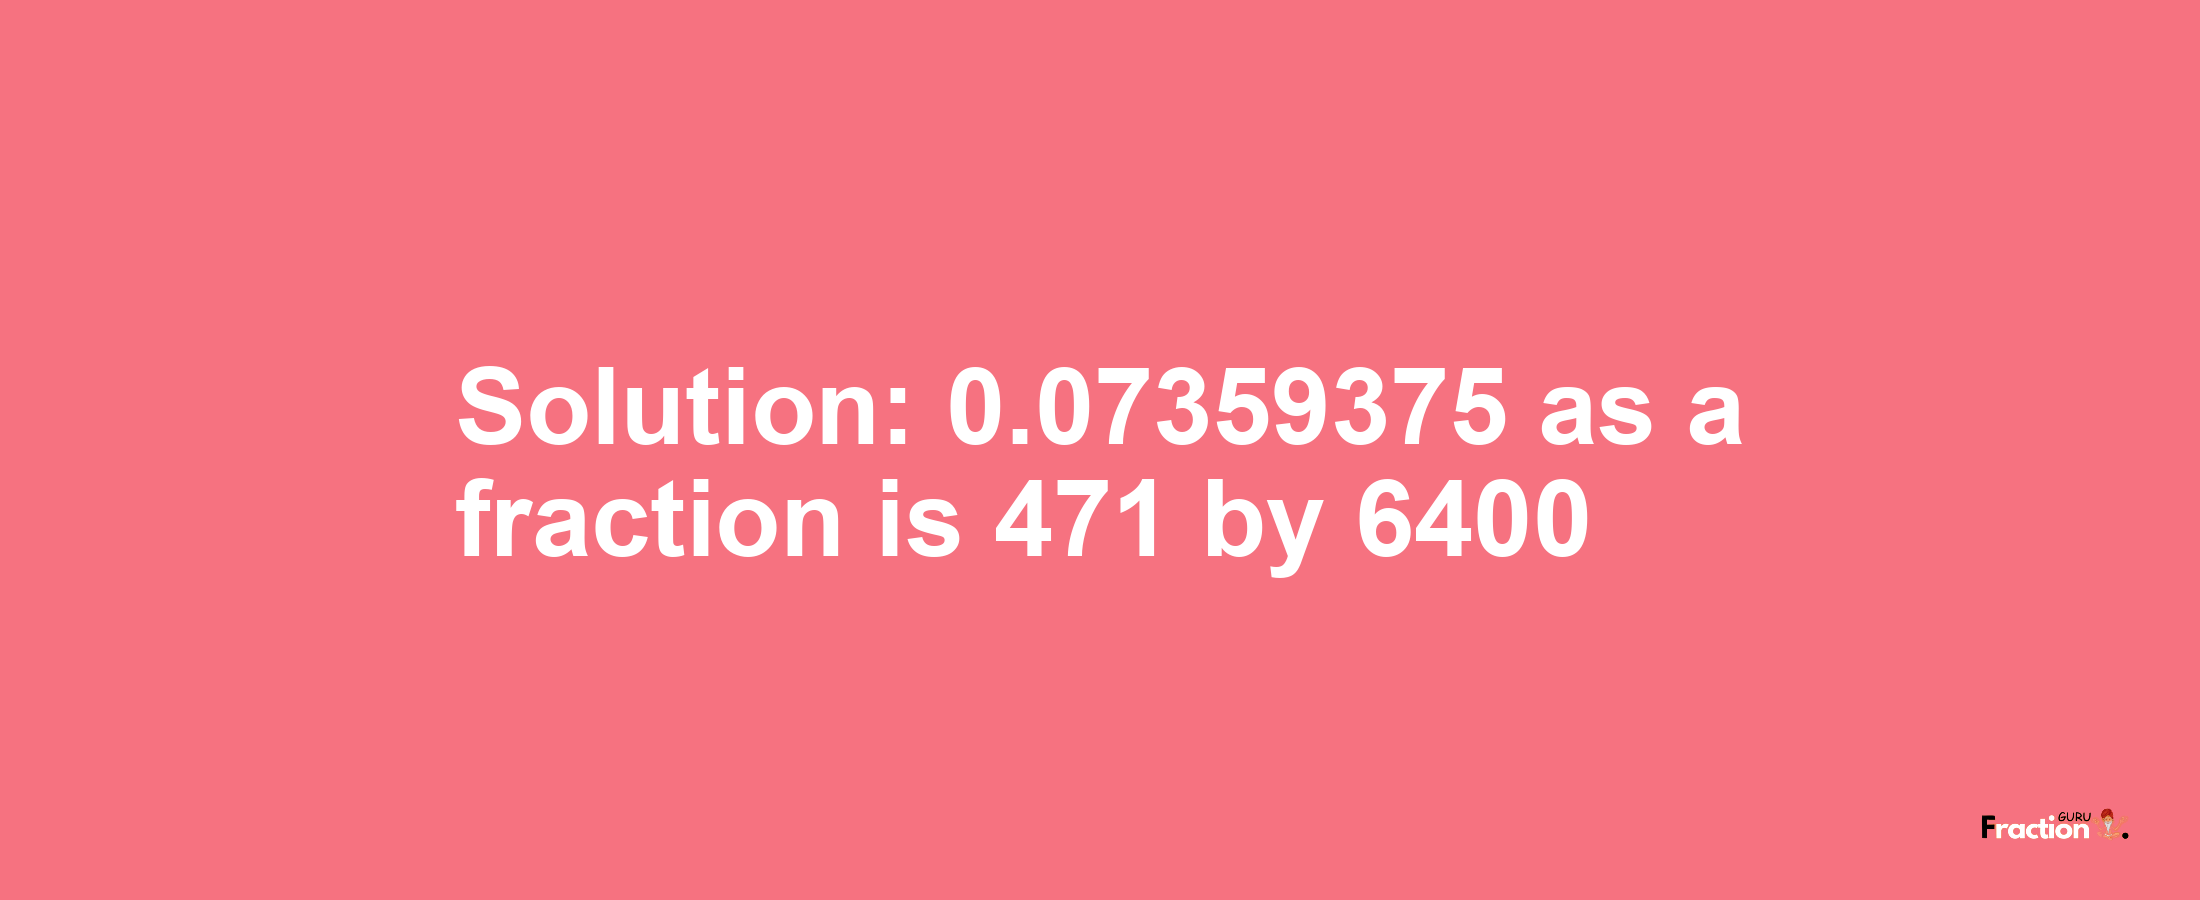 Solution:0.07359375 as a fraction is 471/6400